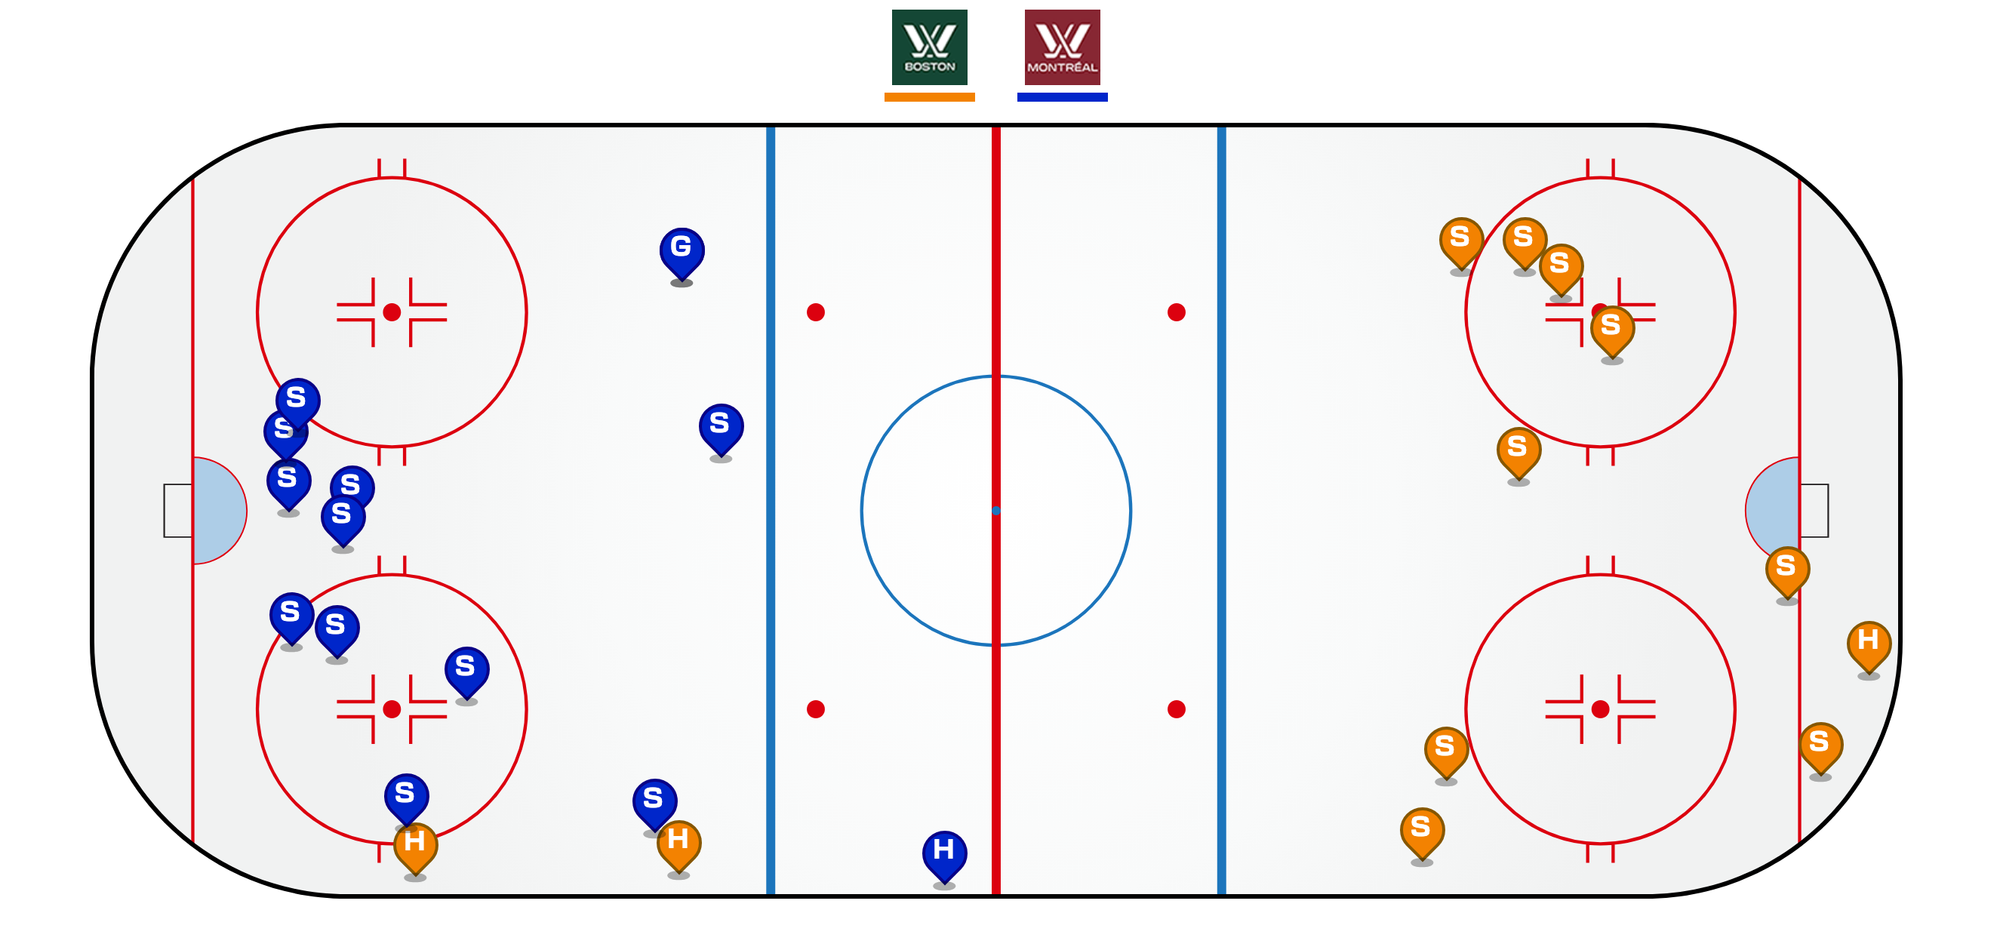 A screenshot of the PWHL's shot tracker showing the location of each team's third-period shots. Montréal is in blue and most of their shots are near the goal crease, while Boston is in orange and most of their shots are from the perimeter of the rink.